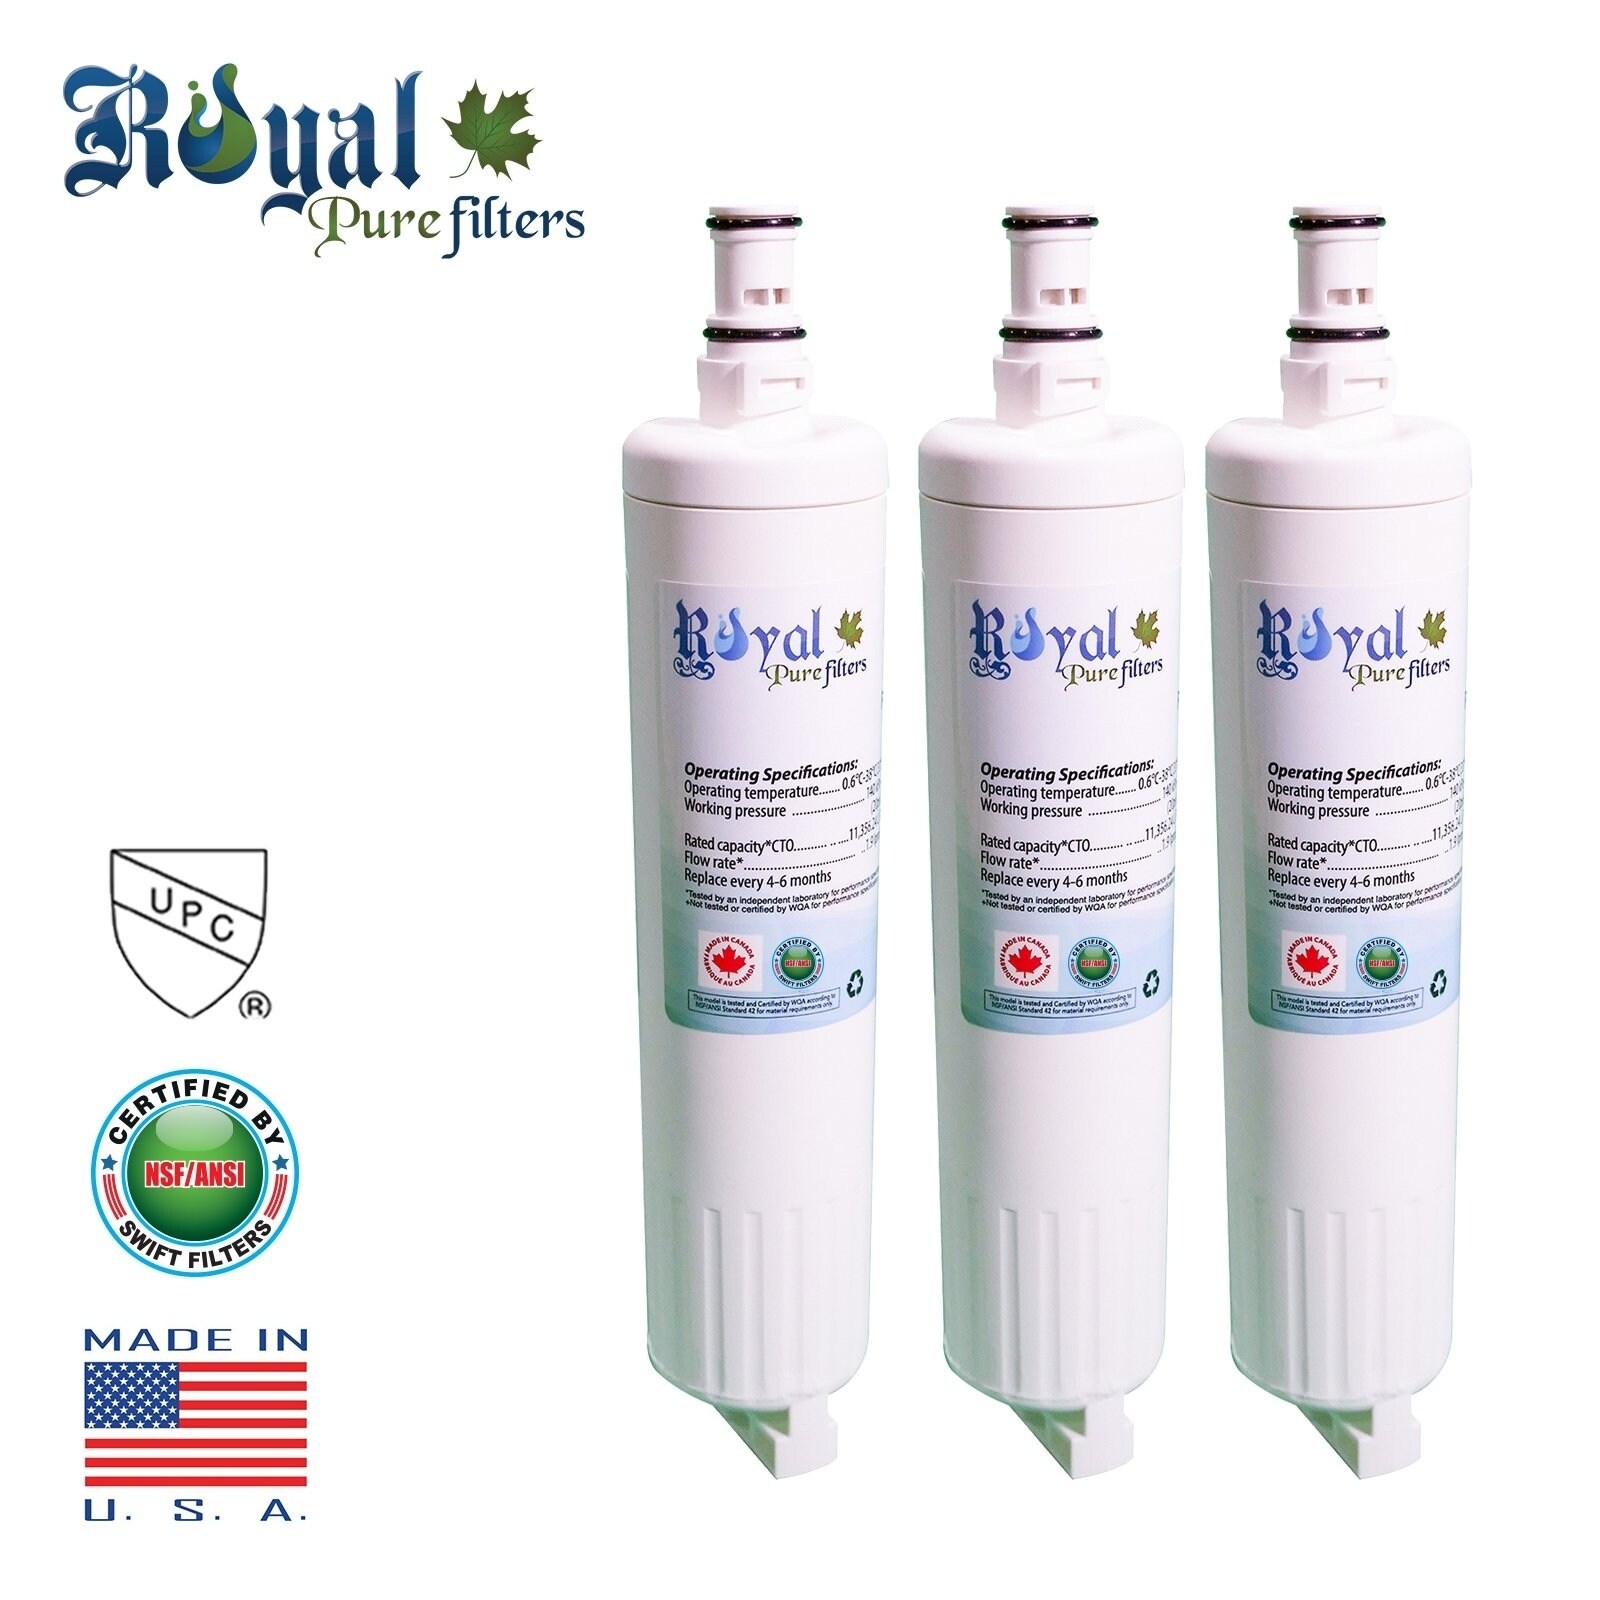 https://ak1.ostkcdn.com/images/products/20045274/RPF-4396508-Replacement-for-Whirlpool-4396508-4396510-Refrigerator-Water-Filter-f00a260e-1914-4bb7-911d-f83b463af1a9.jpg